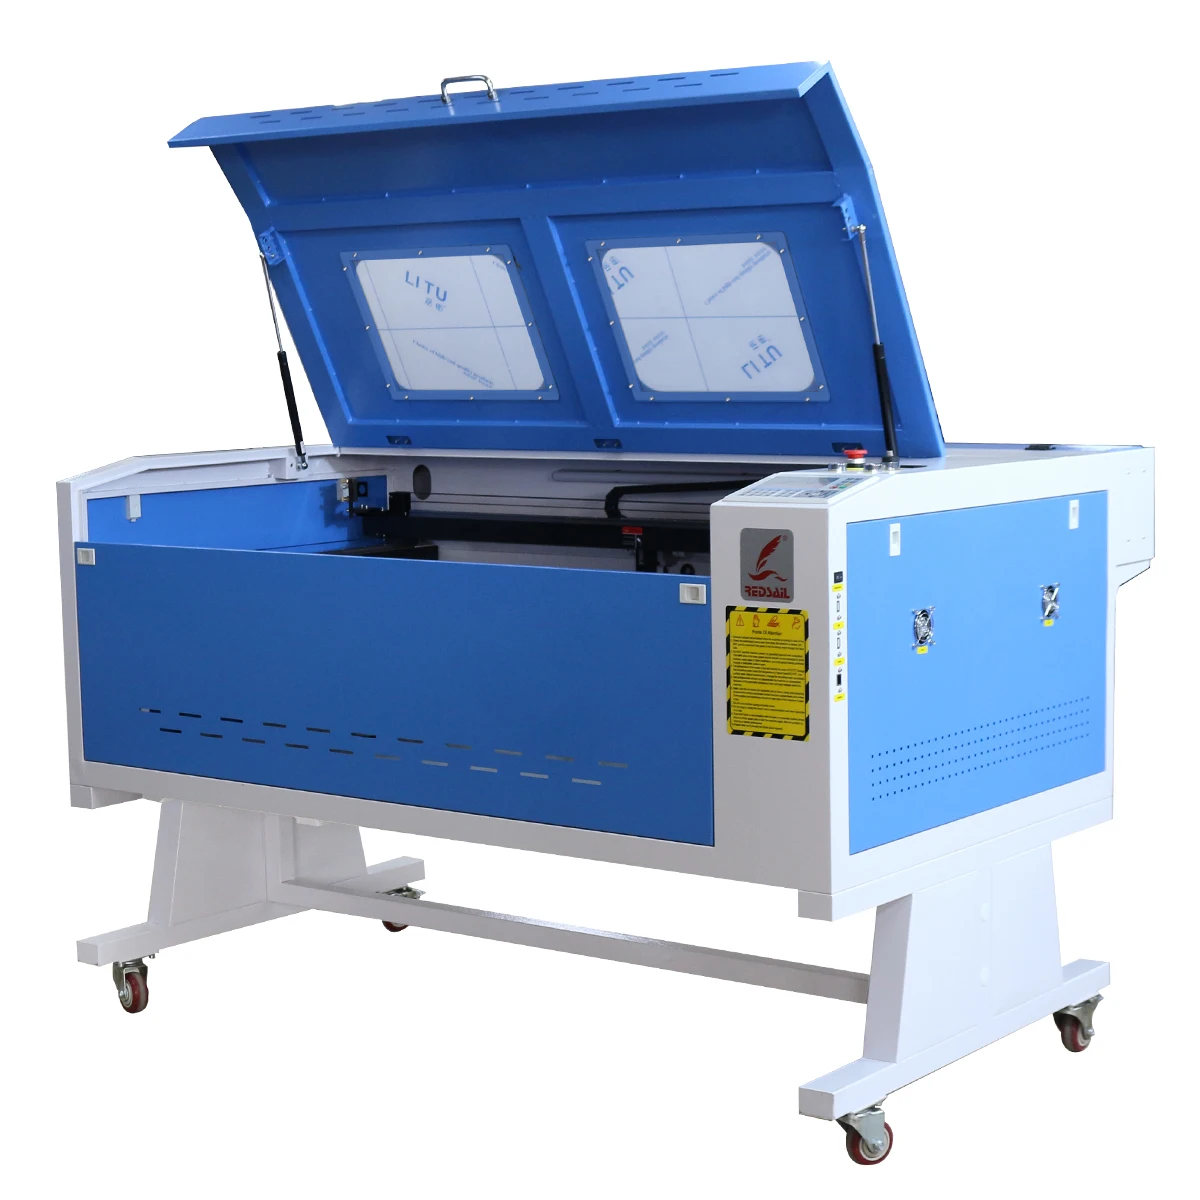 

80W 60x100 cm co2 laser engraving machine with a rotary for cylinder things engraving